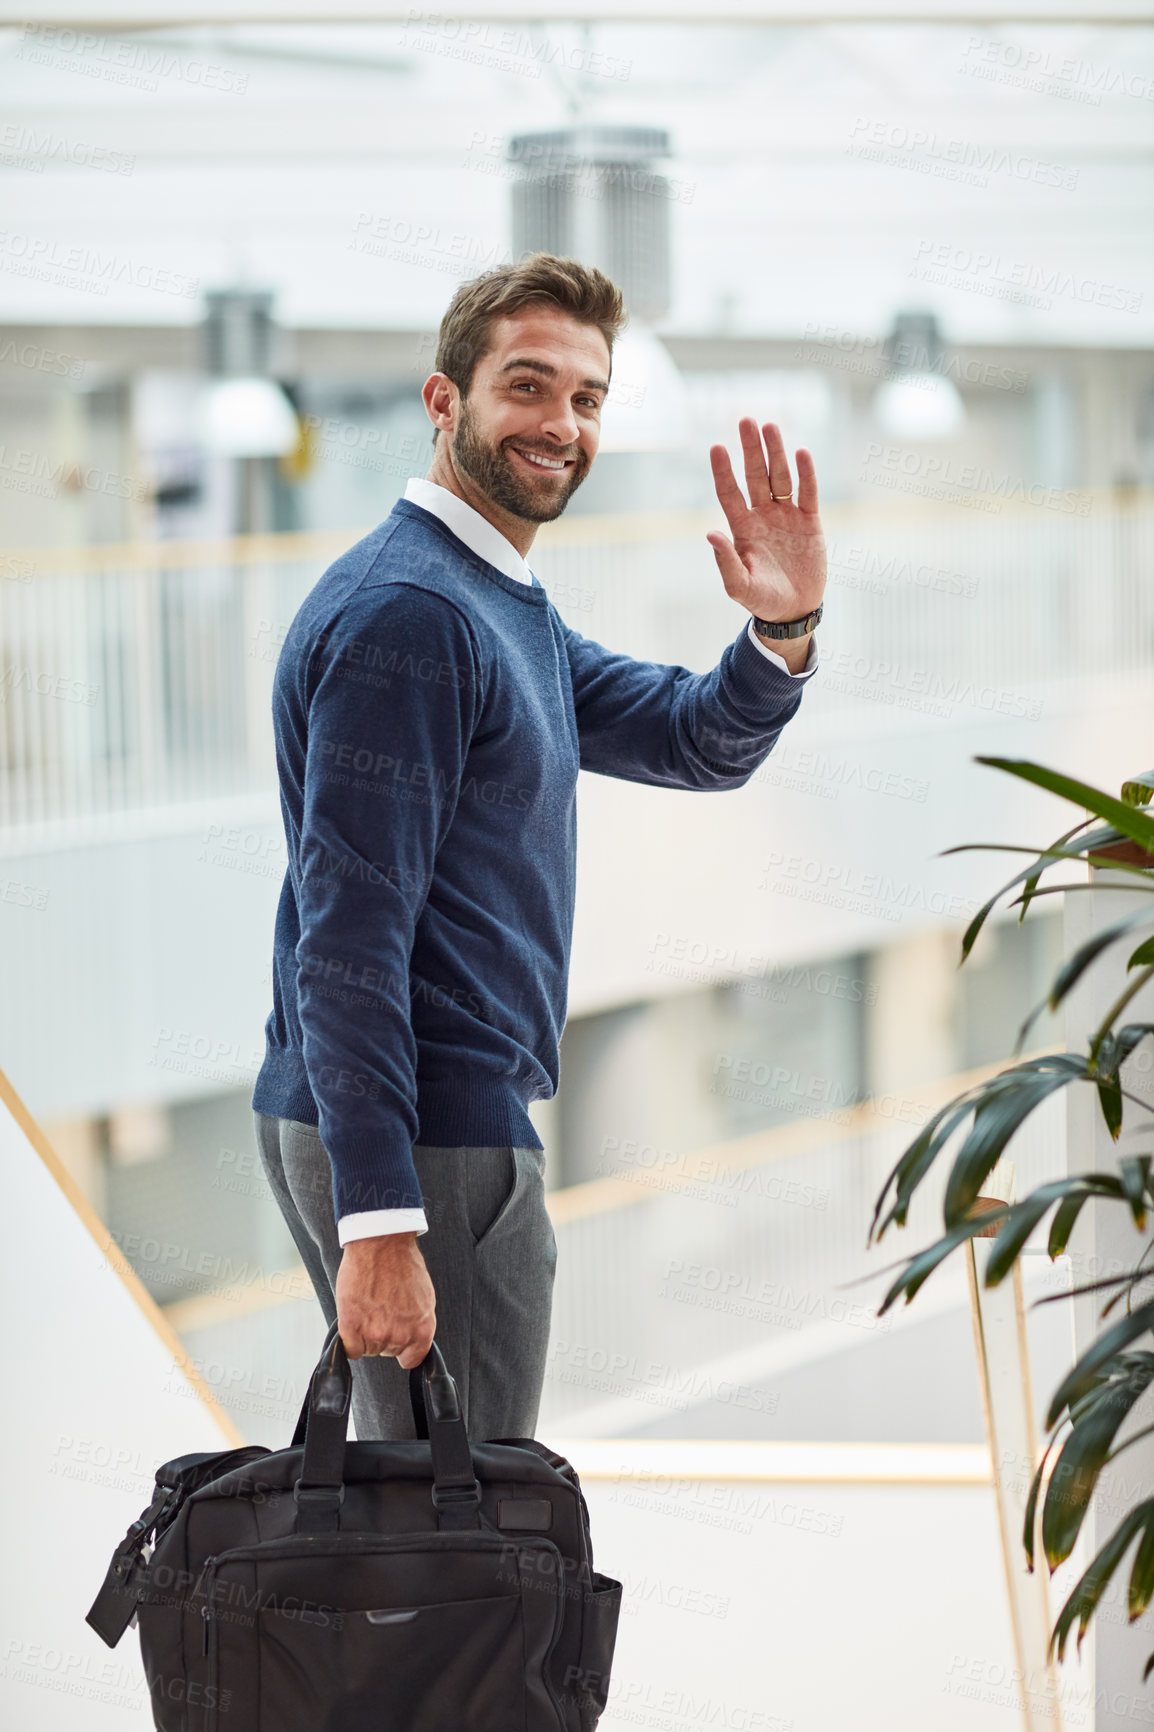 Buy stock photo Portrait of a young businessman waving while carrying a bag